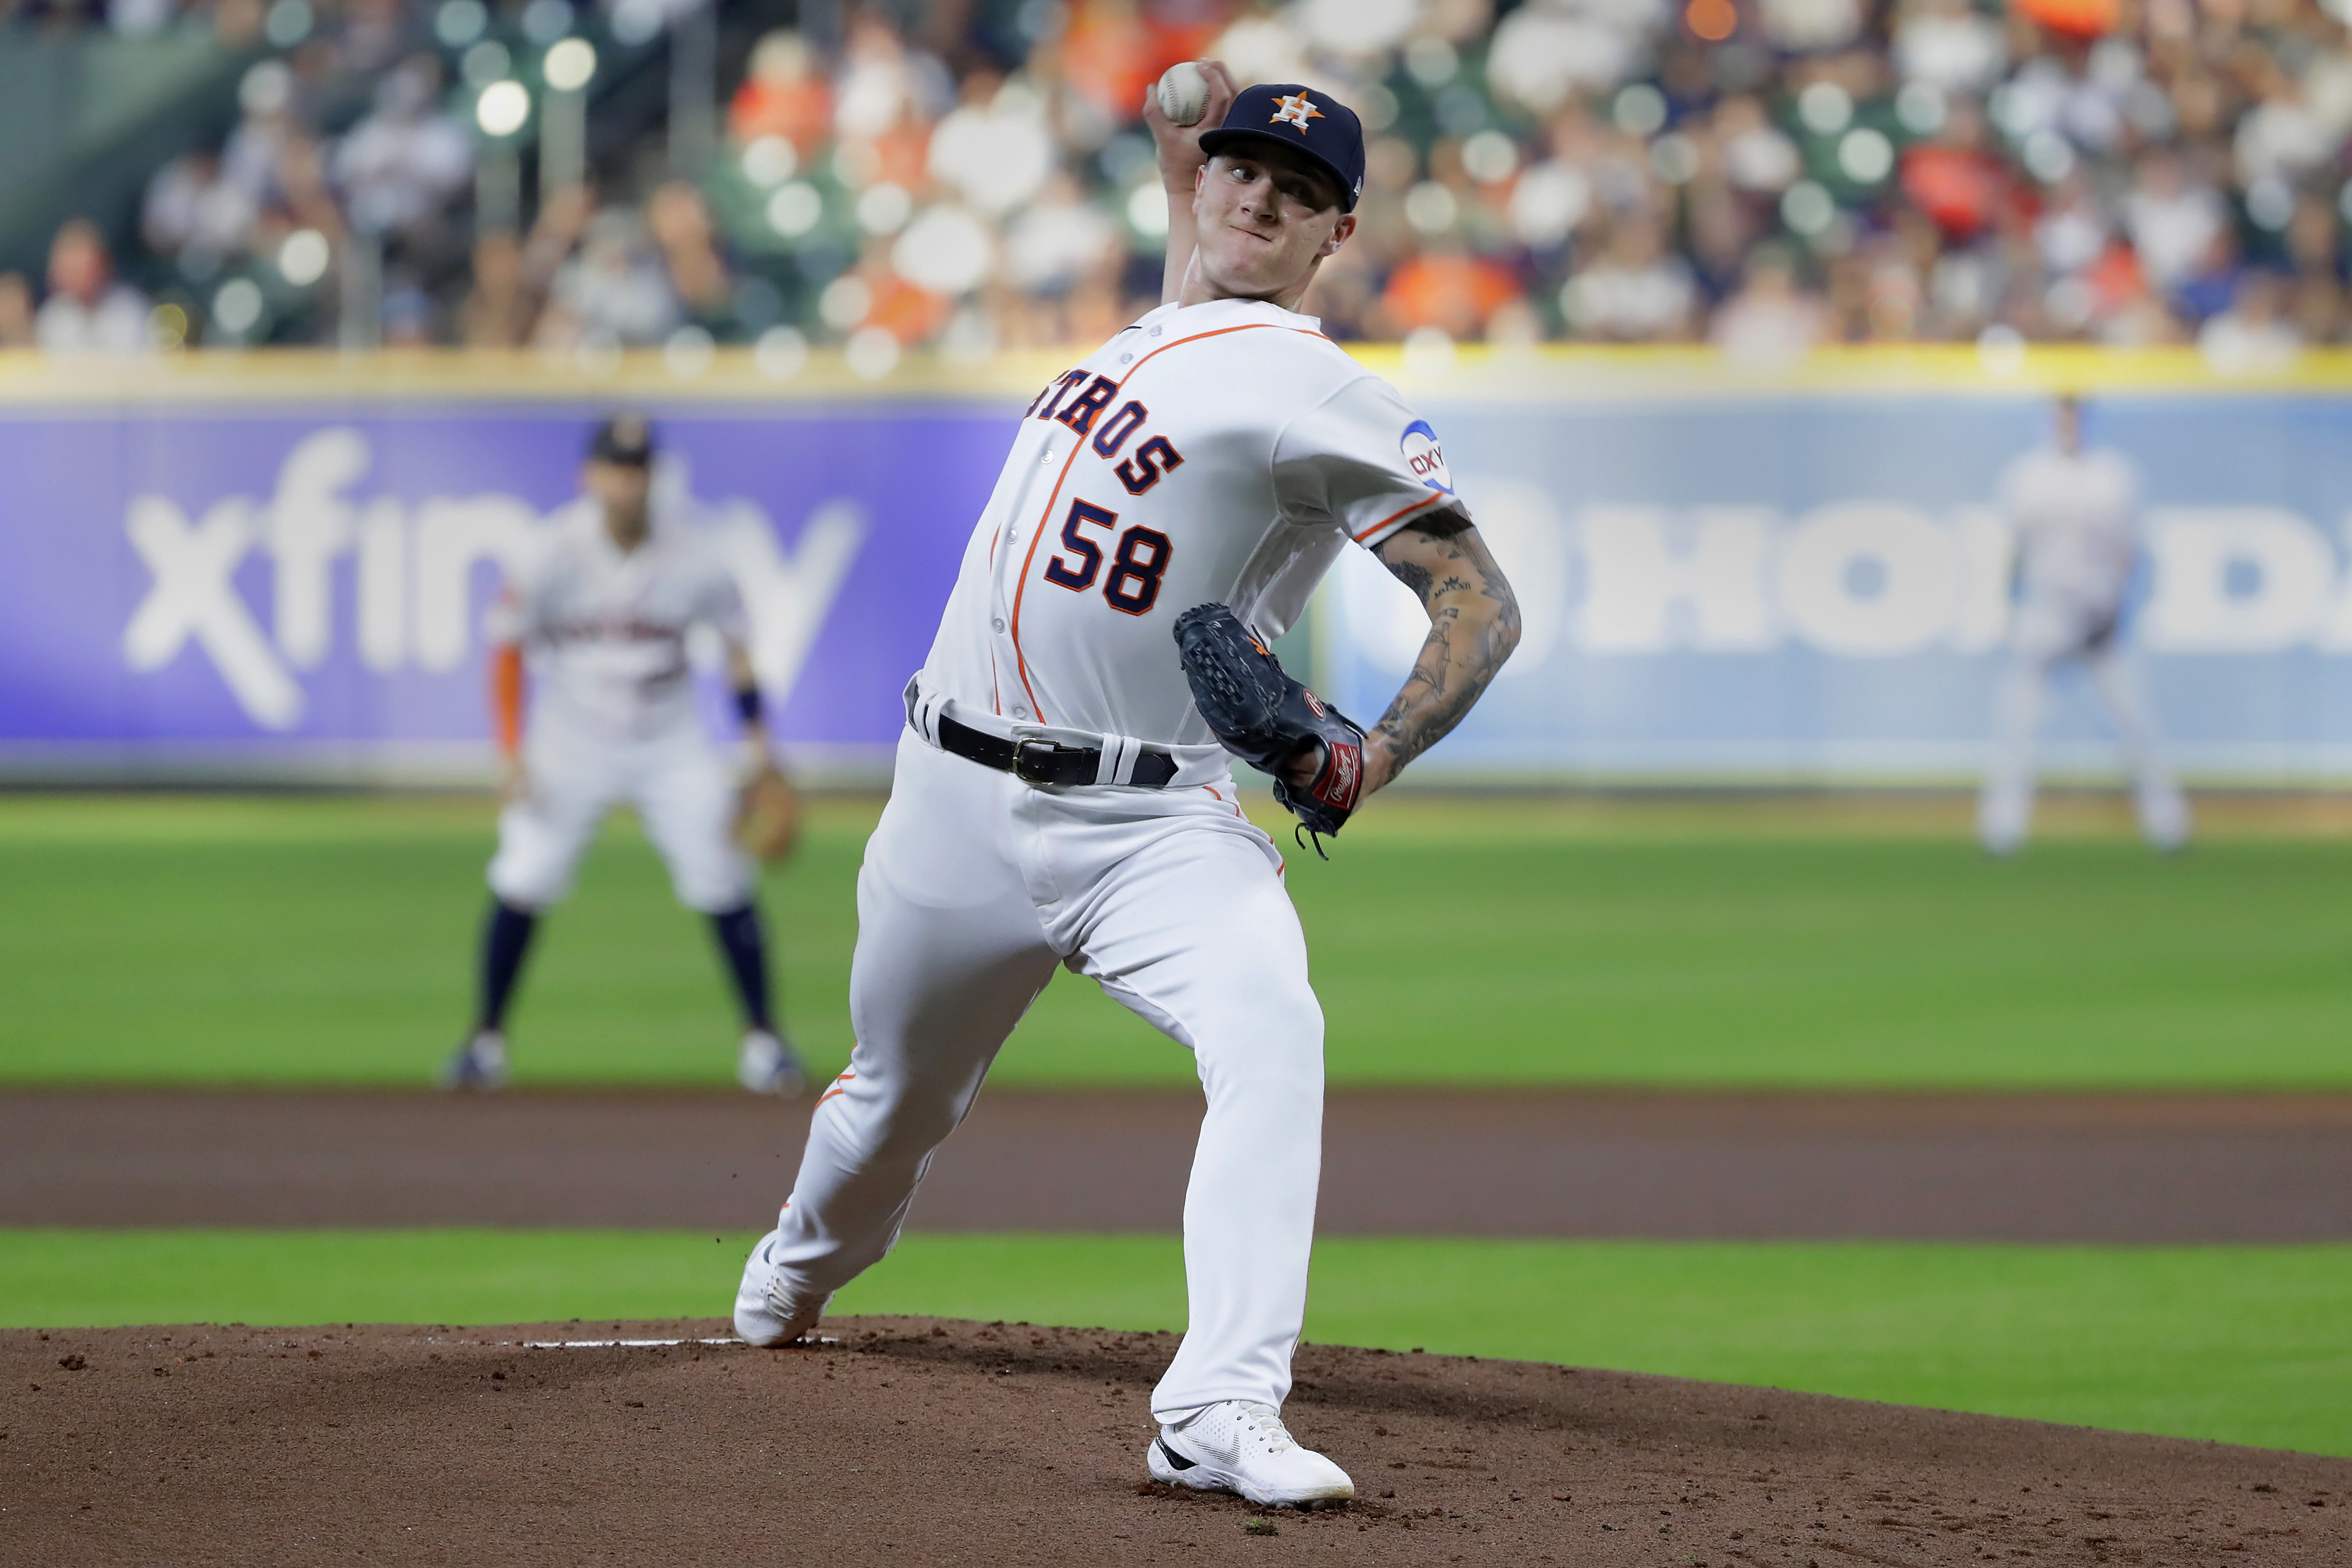 Noda's 1-out single in 9th ends no-hit bid, Astros win 6-2 and send  Athletics to 100th loss